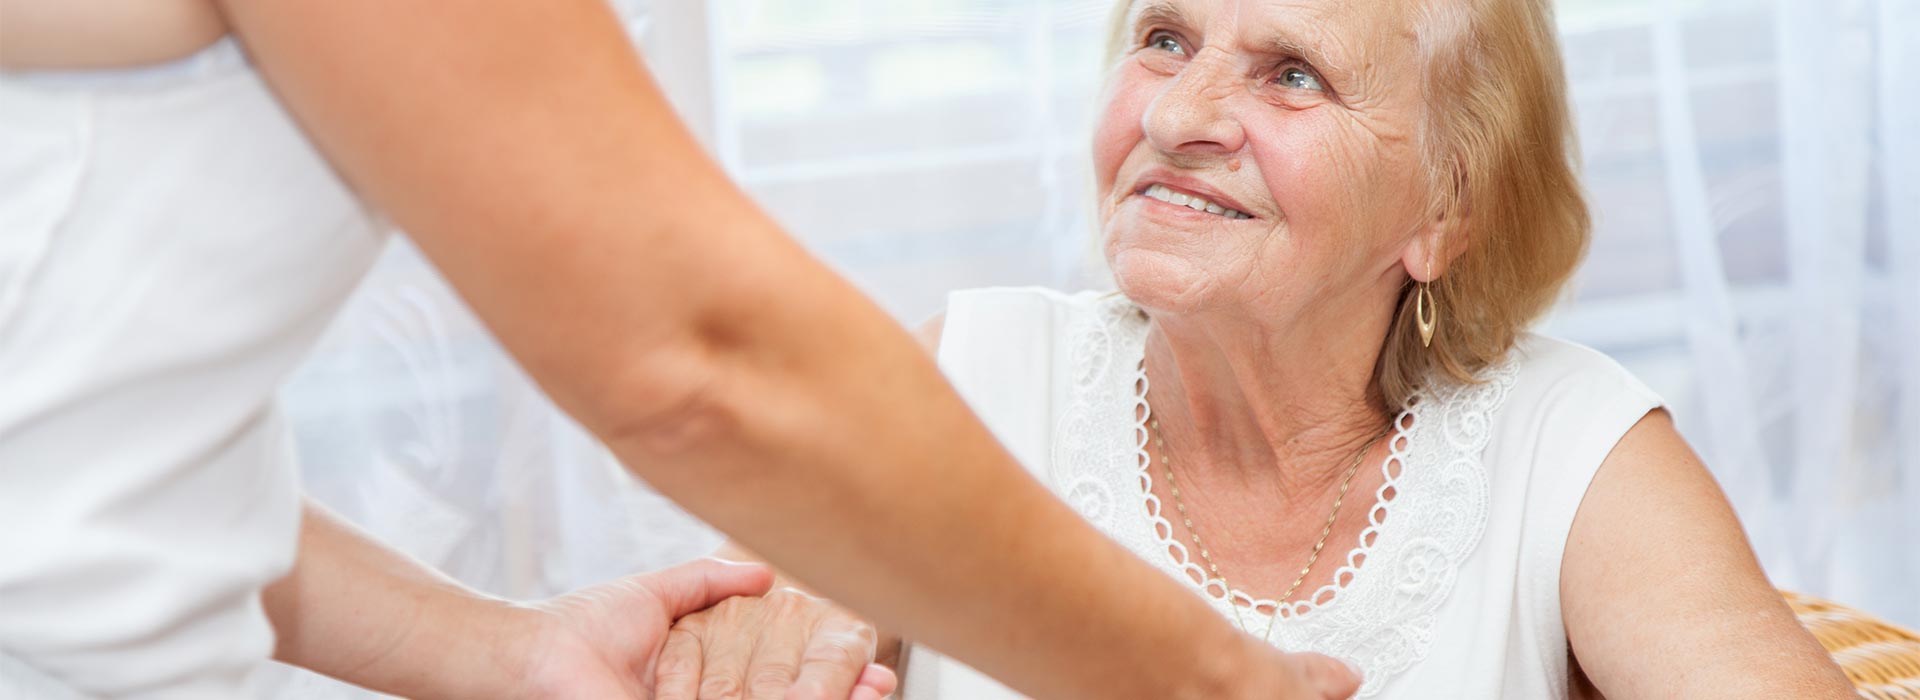 Timberland Home Care Packages Try Home Care on a Trial Basis